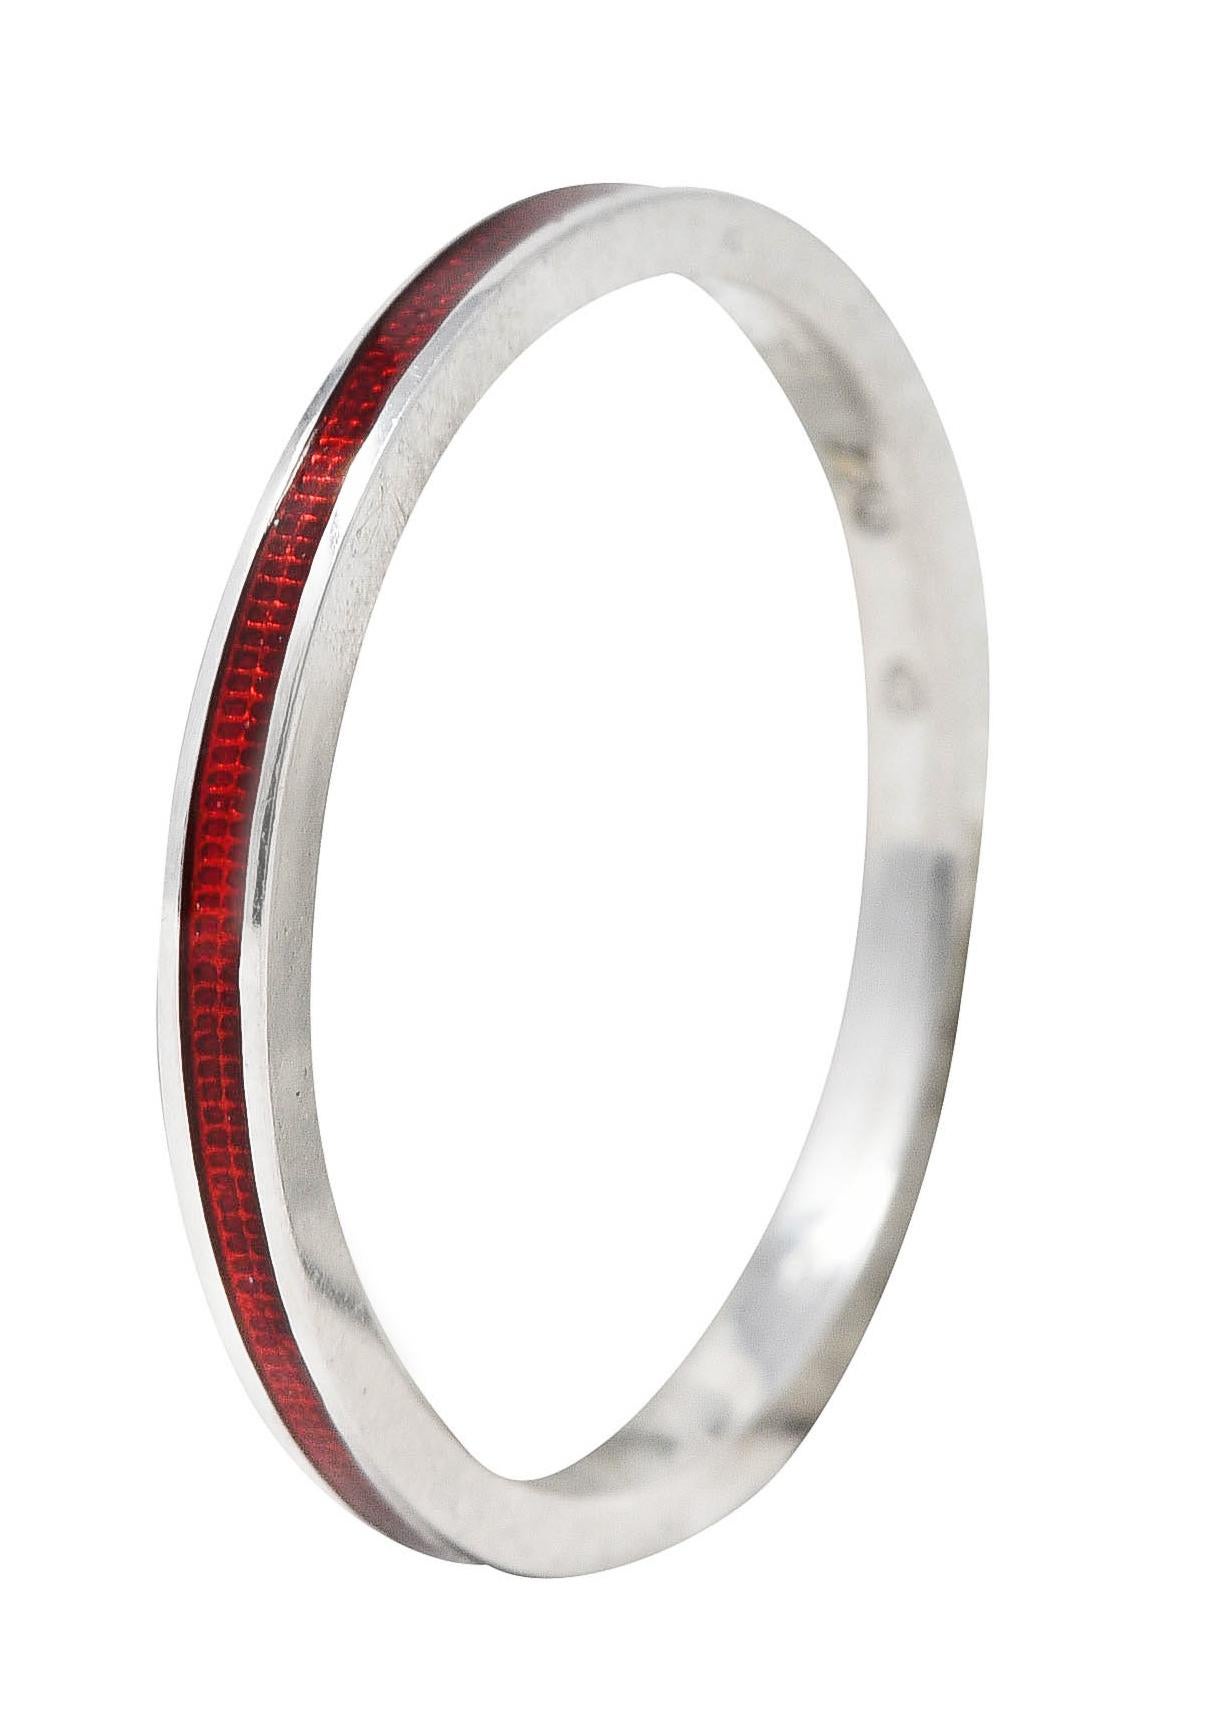 Band ring features a recessed guilloche enamel channel fully around. Glossy and transparent medium red in color over engraved linear pattern. With high polished gold surround. Stamped 750 for 18 karat gold. Signed with maker's mark for Hidalgo.